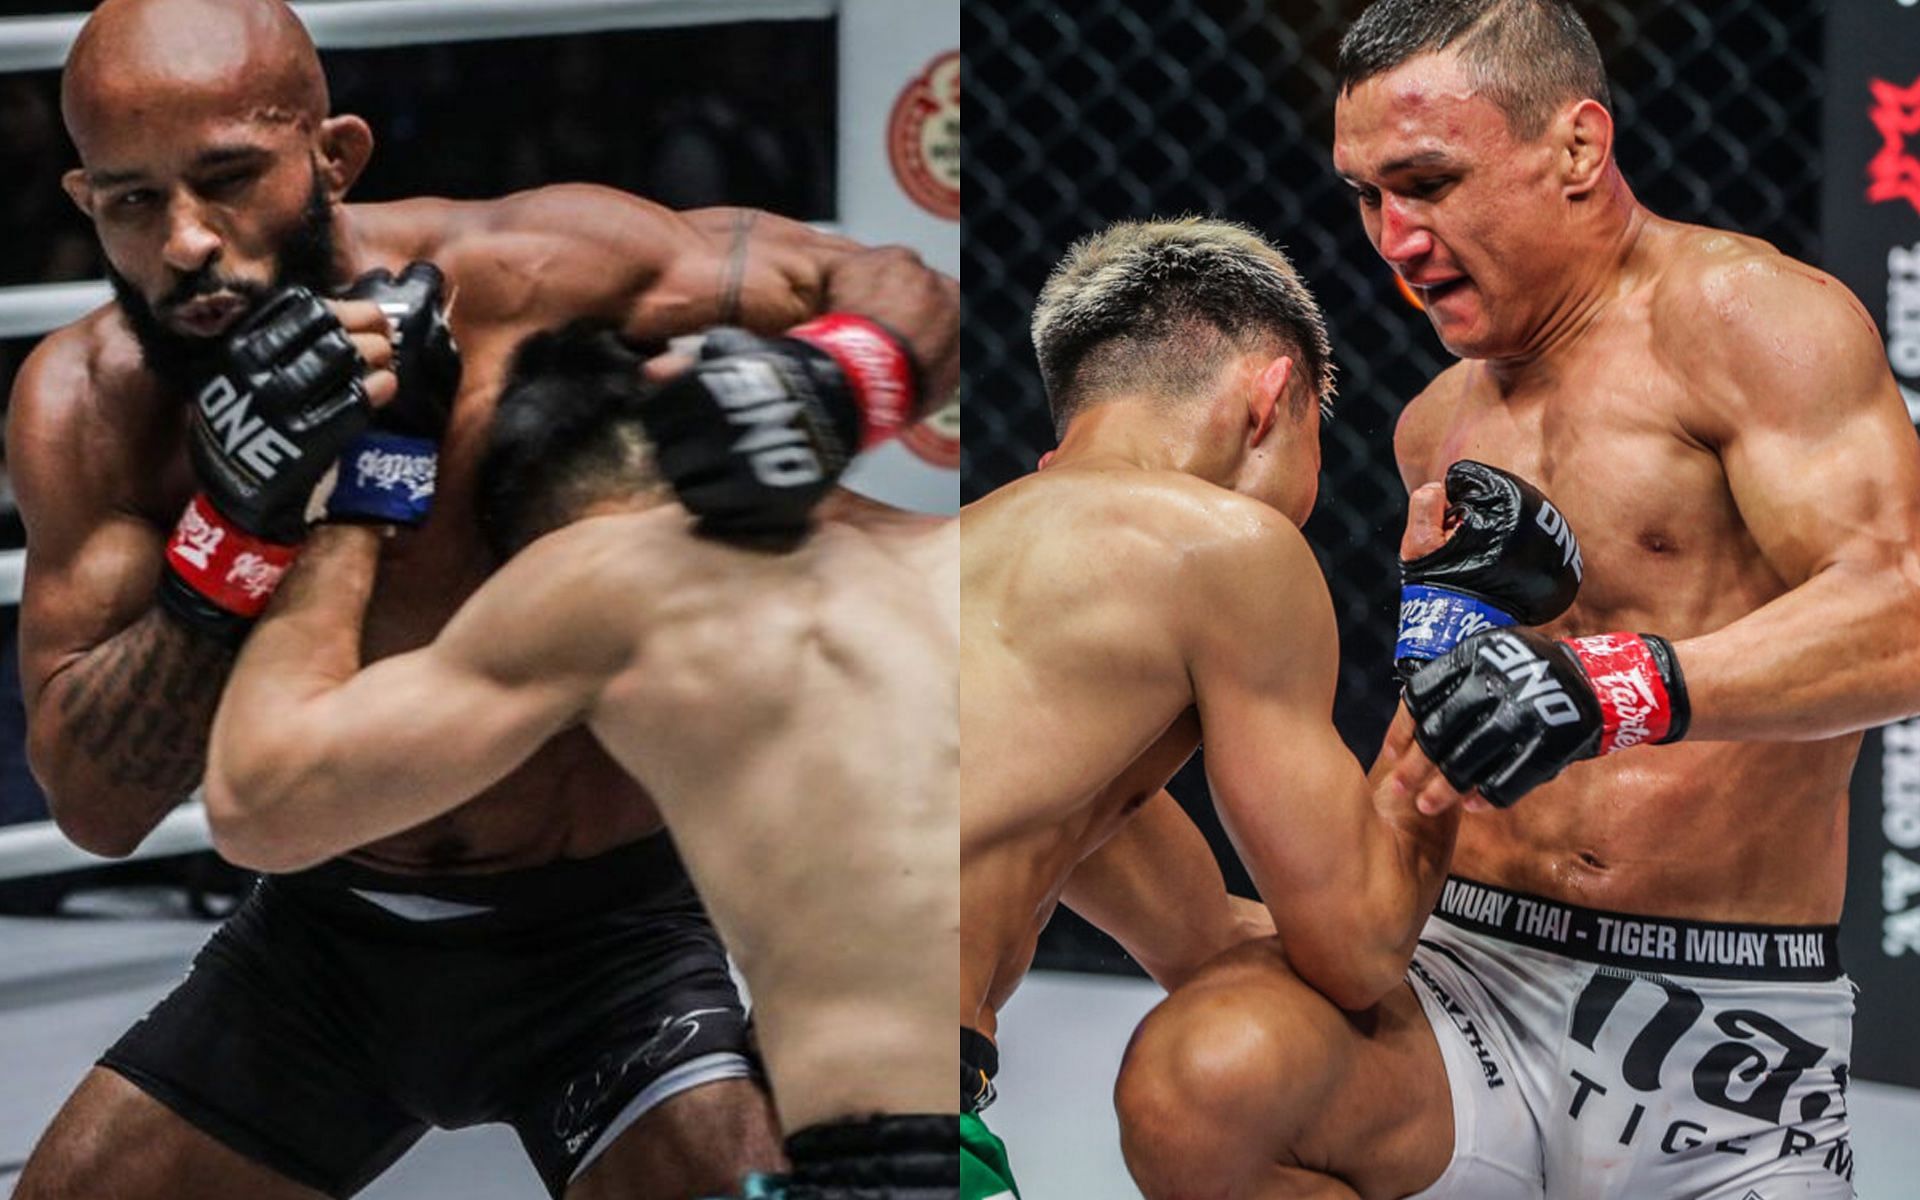 Demetrious Johnson (L) and Kairat Akhmetov (R) both claimed victories over Tatsumitsu Wada, but in different manners. | [Photo: ONE Championship]